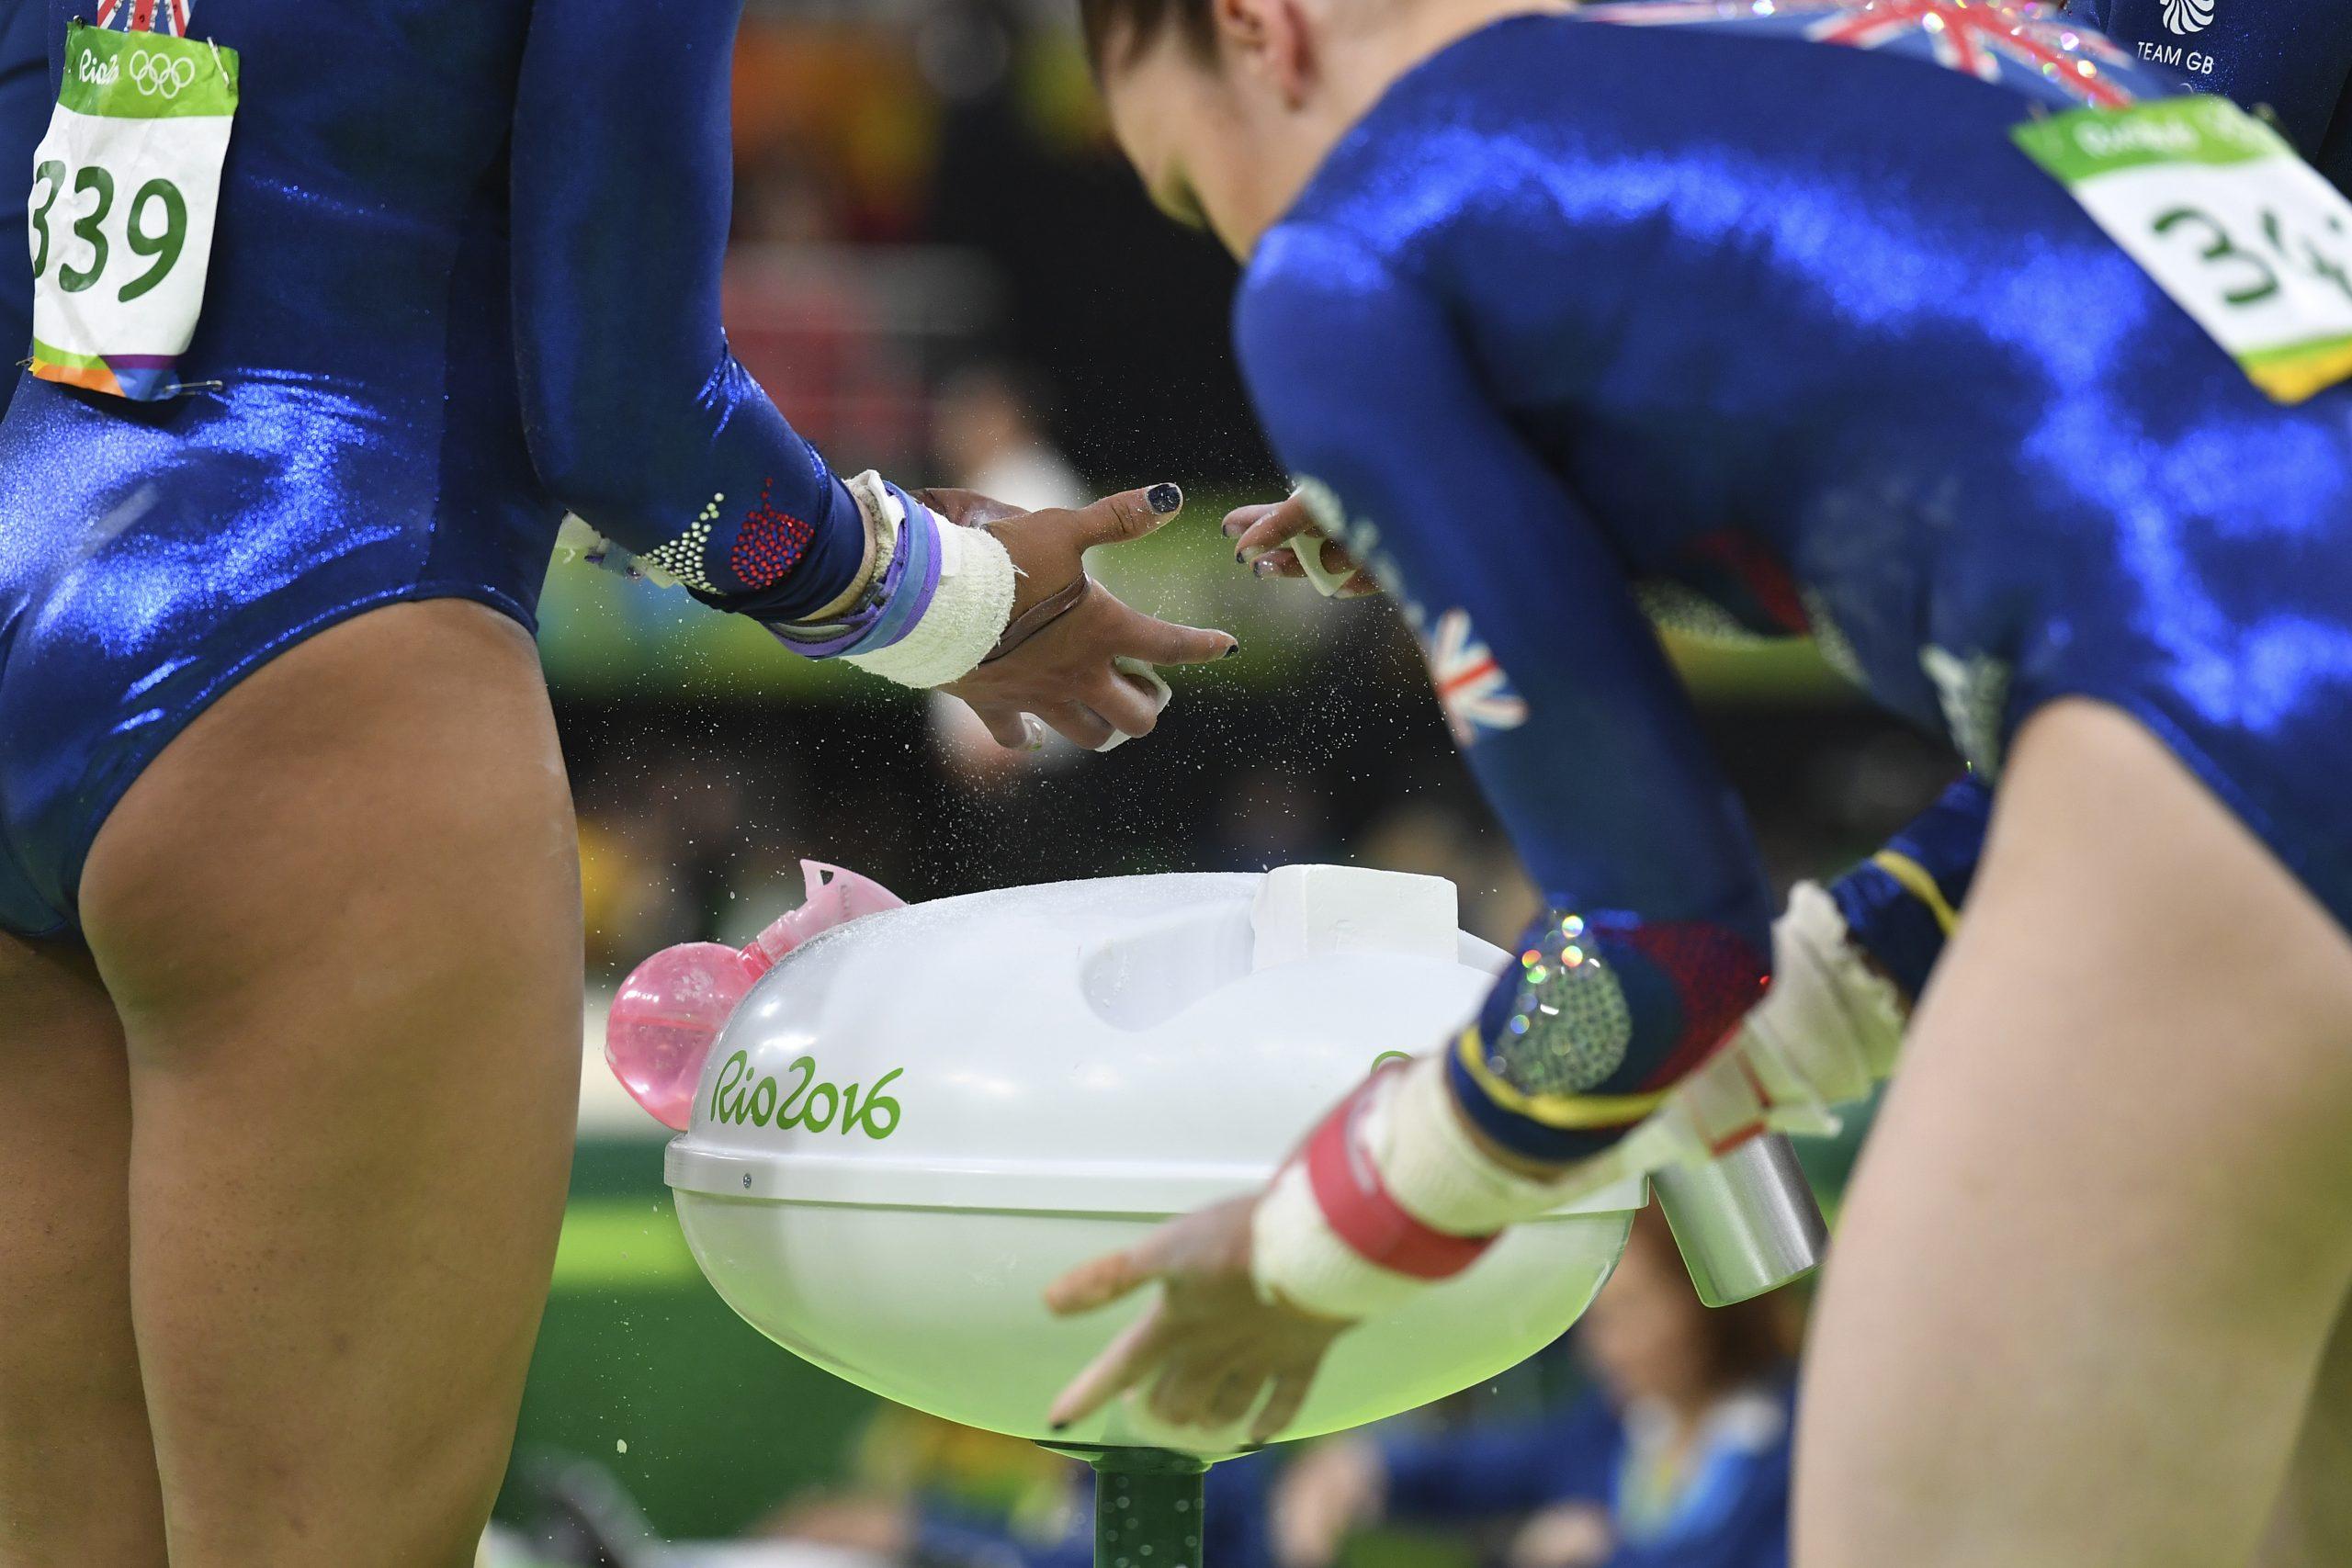 British gymnasts prepare with chalk during the qualifying for the women's Artistic Gymnastics at the Olympic Arena during the Rio 2016 Olympic Games in Rio de Janeiro on Aug 7, 2016. Photo: AFP